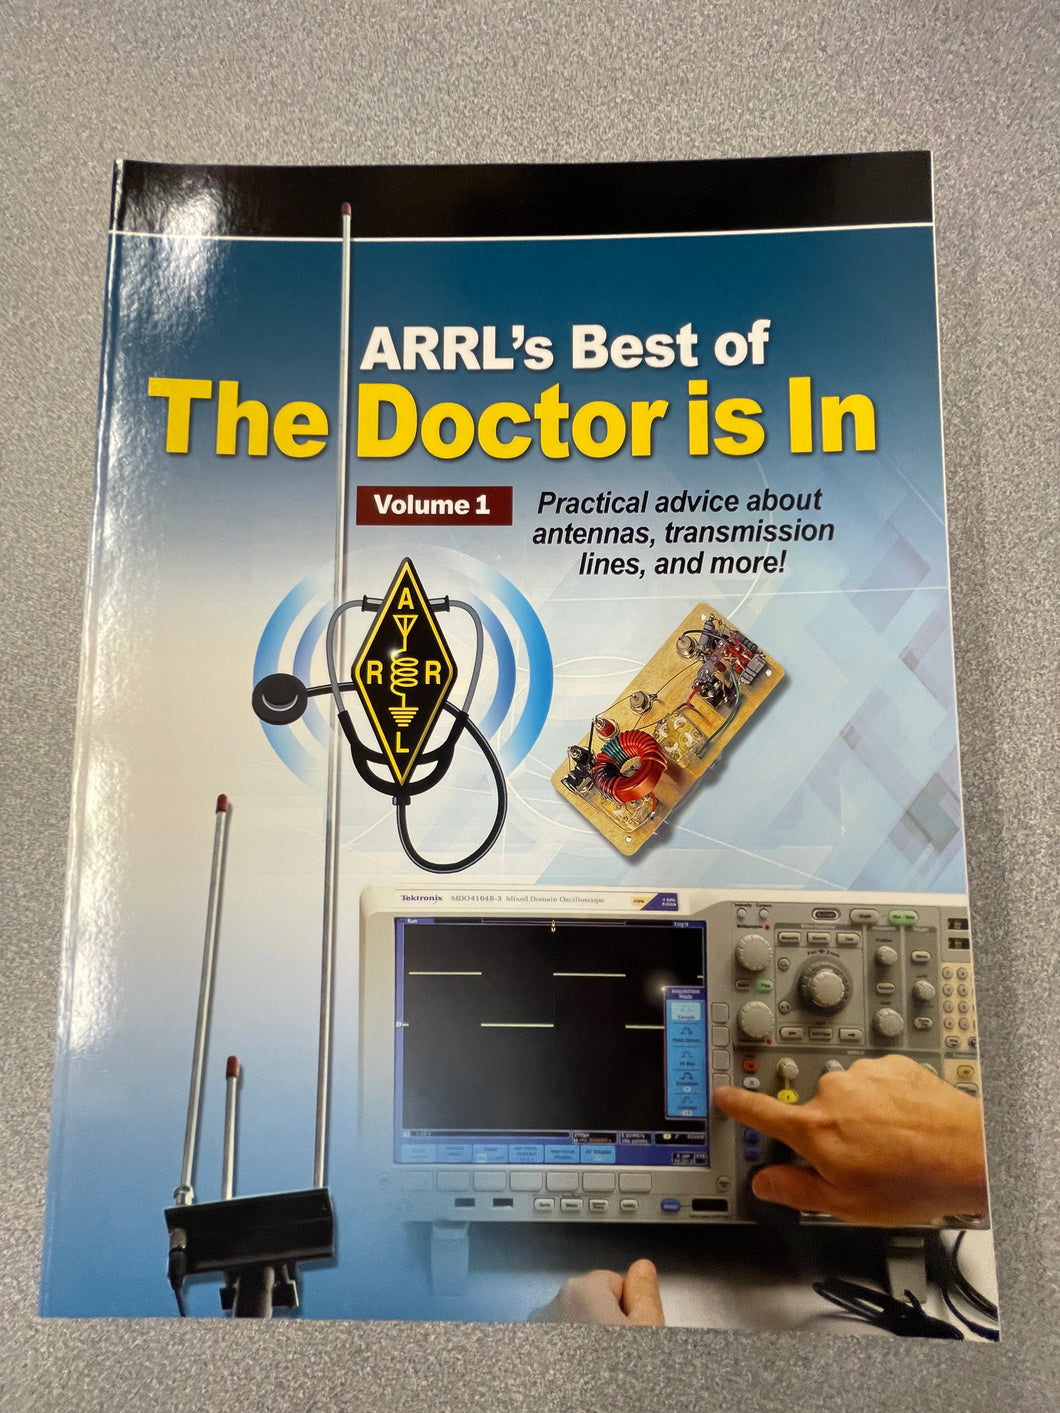 ARRL's Best of The Doctor Is In, Volume 1: Practical Advice About Antennas, Transmission Lines, and More!, Halas, Joel [2017] CG 2/24